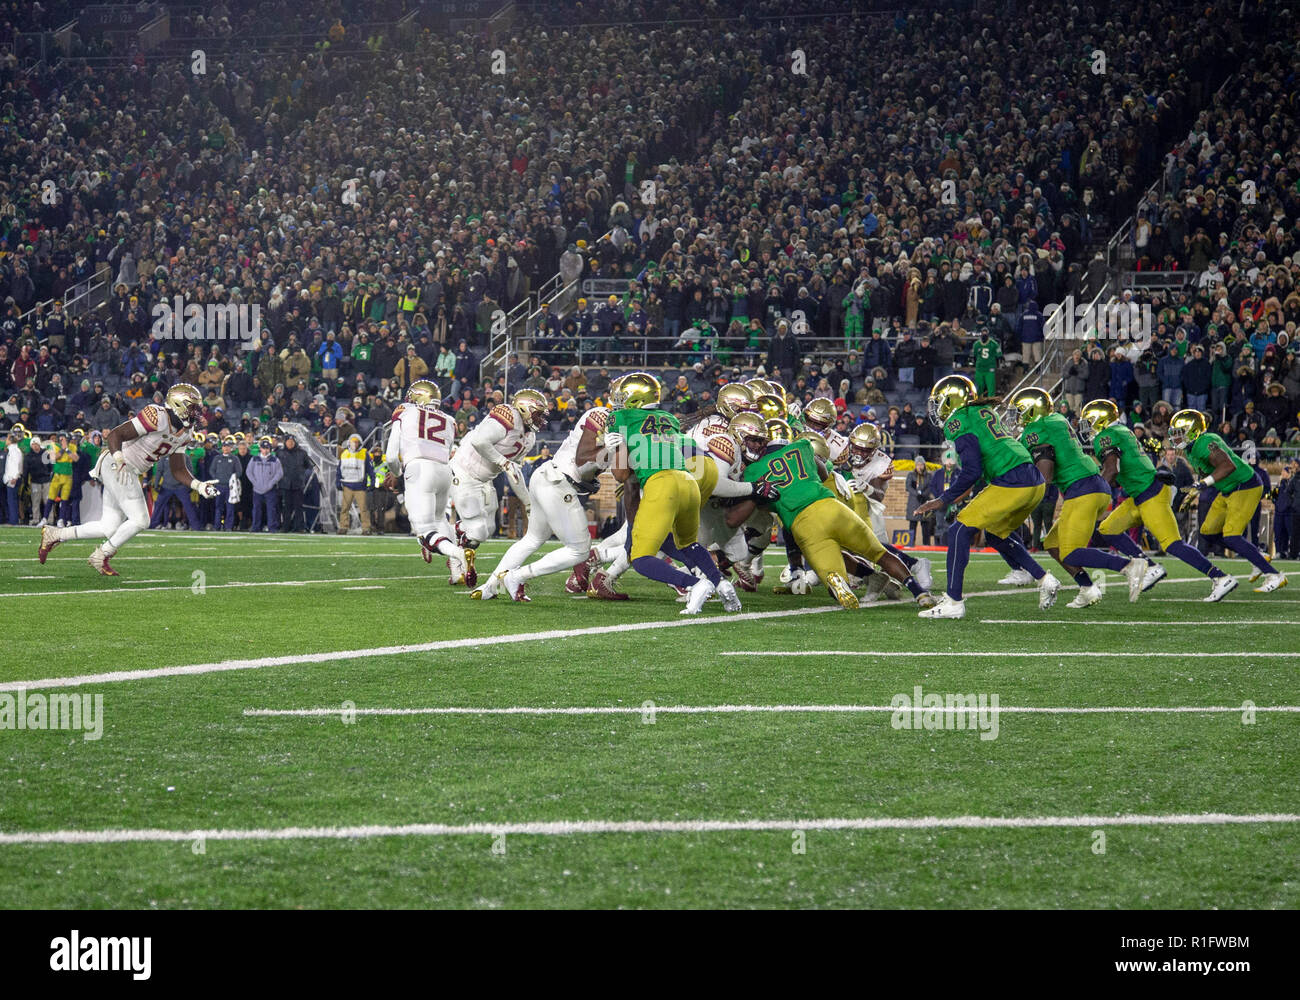 South Bend, Indiana, USA. 10th Nov, 2018. A general view during NCAA football game action between the Florida State Seminoles and the Notre Dame Fighting Irish at Notre Dame Stadium in South Bend, Indiana. Notre Dame defeated Florida State 42-13. John Mersits/CSM/Alamy Live News Stock Photo